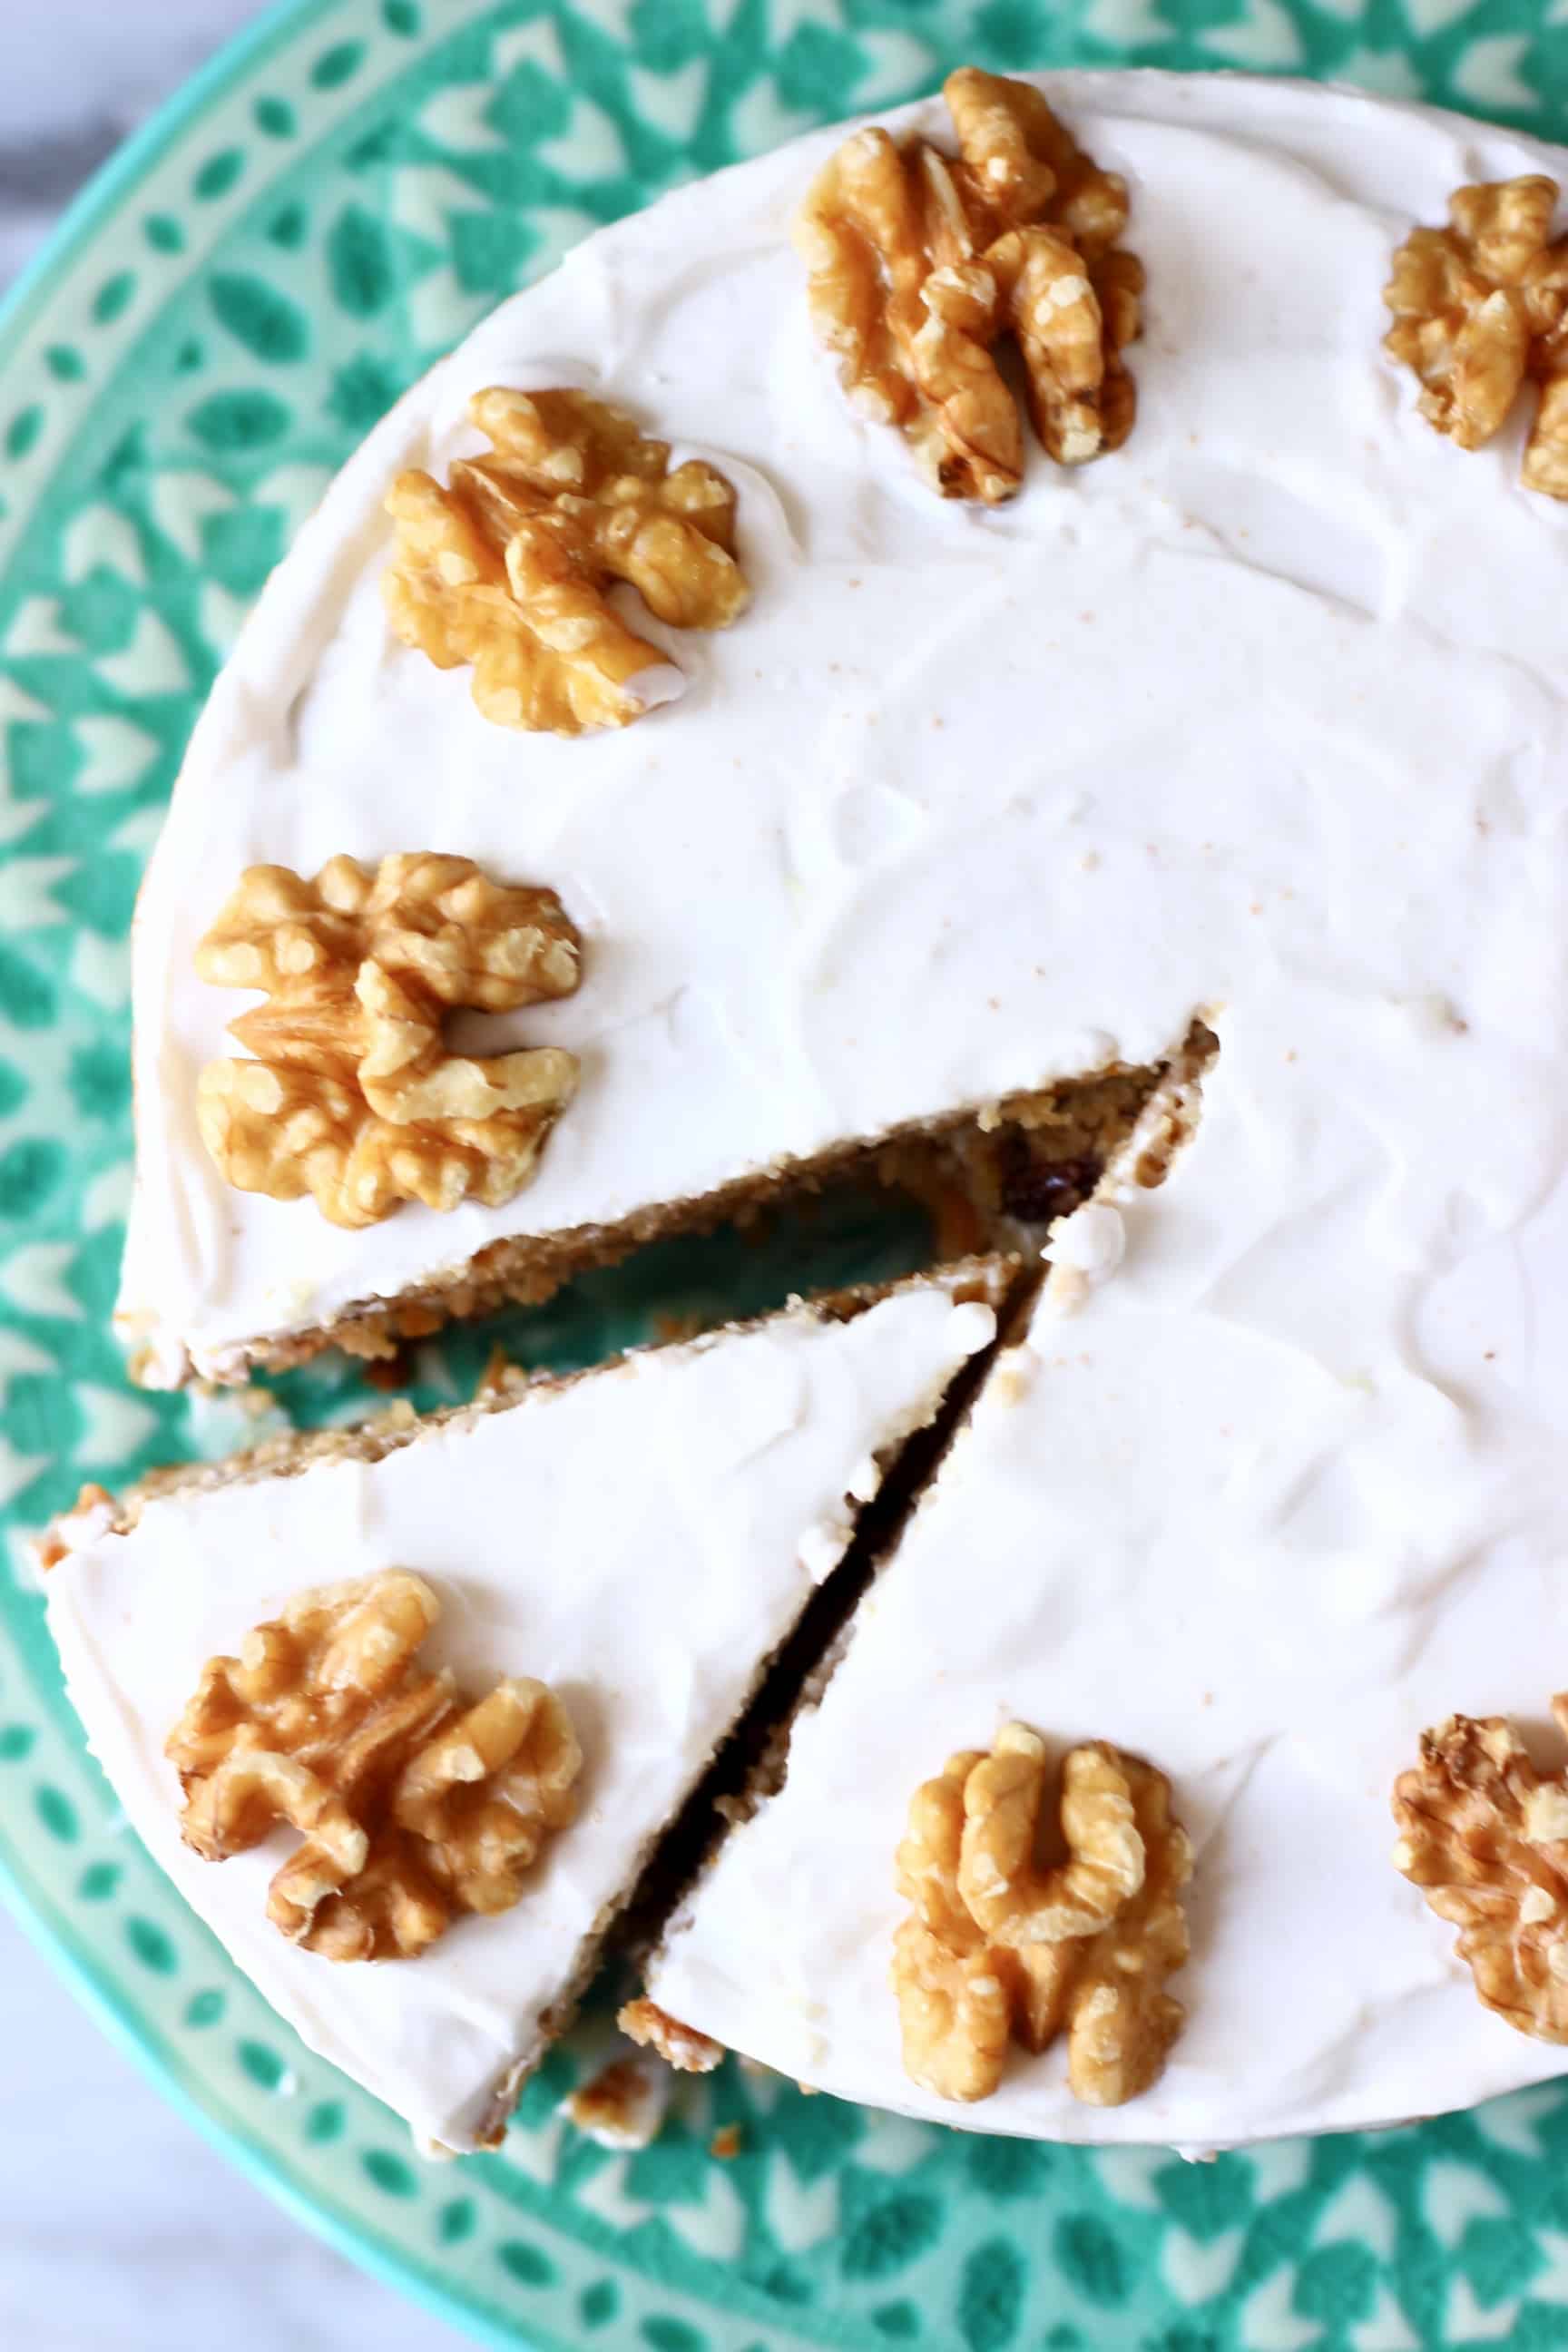 A vegan carrot cake topped with walnuts on a green cake stand with a slice cut out of it